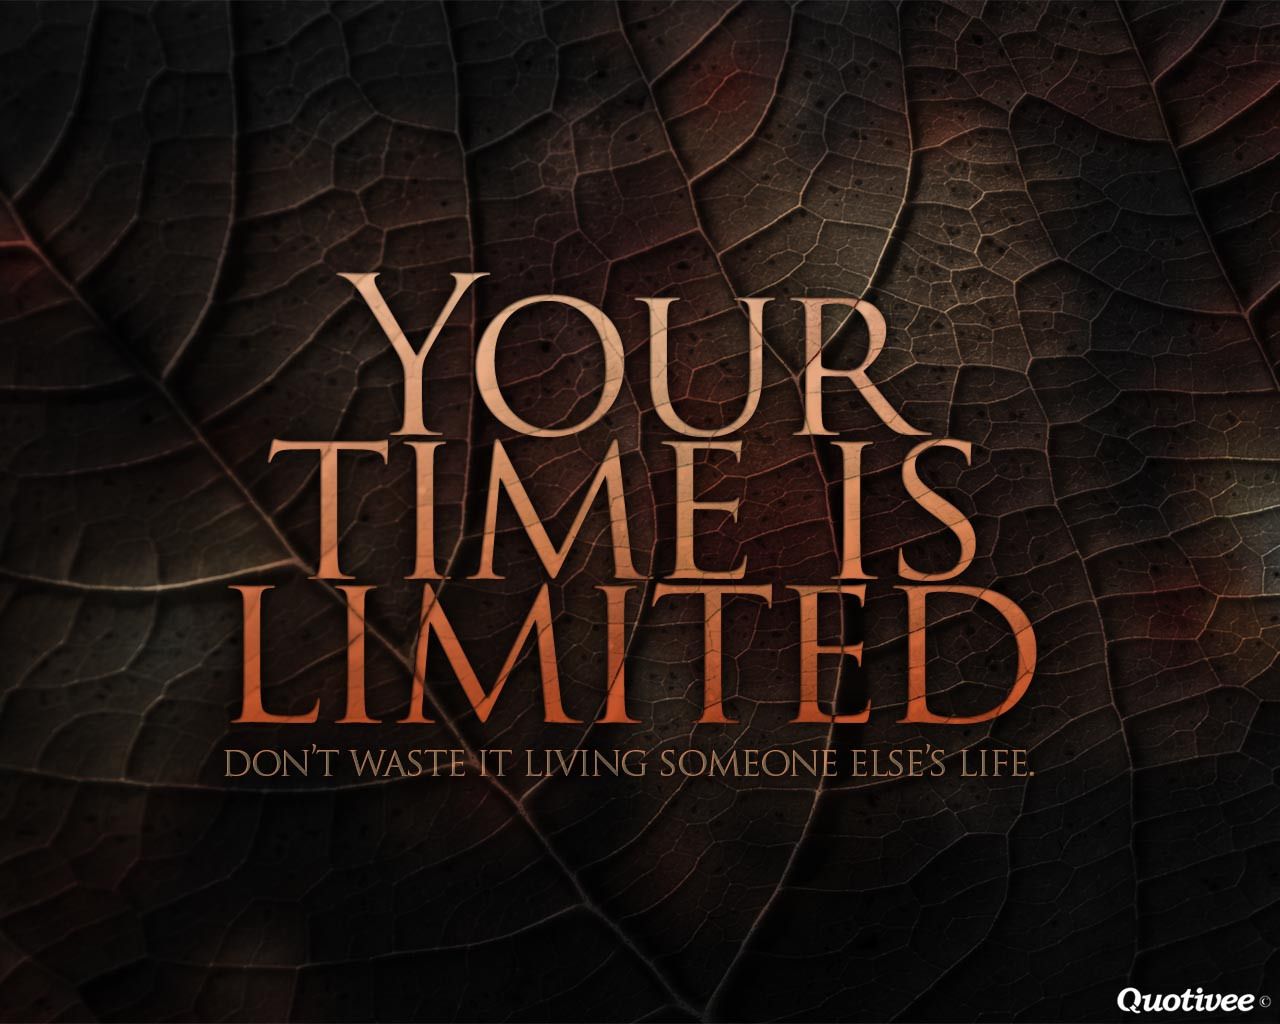 Your time is Limited Don't waste it living someone else's life. Quotes to live by, Inspirational quotes, Motivational wallpaper